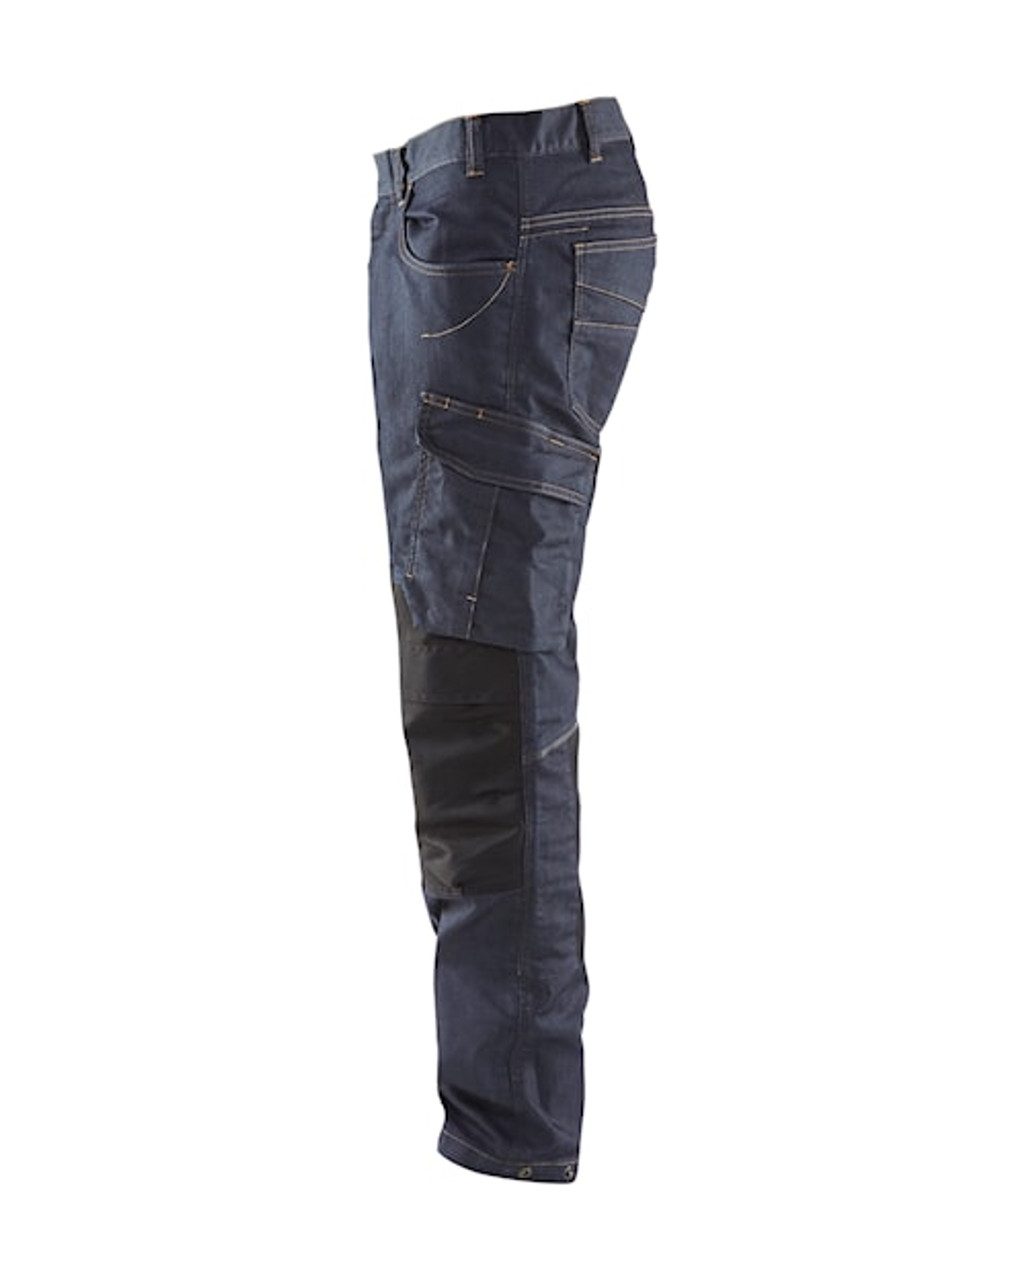 Suitable work Trousers available in Australia and New Zealand BLAKLADER Denim with Stretch Navy Blue Trousers for Electricians